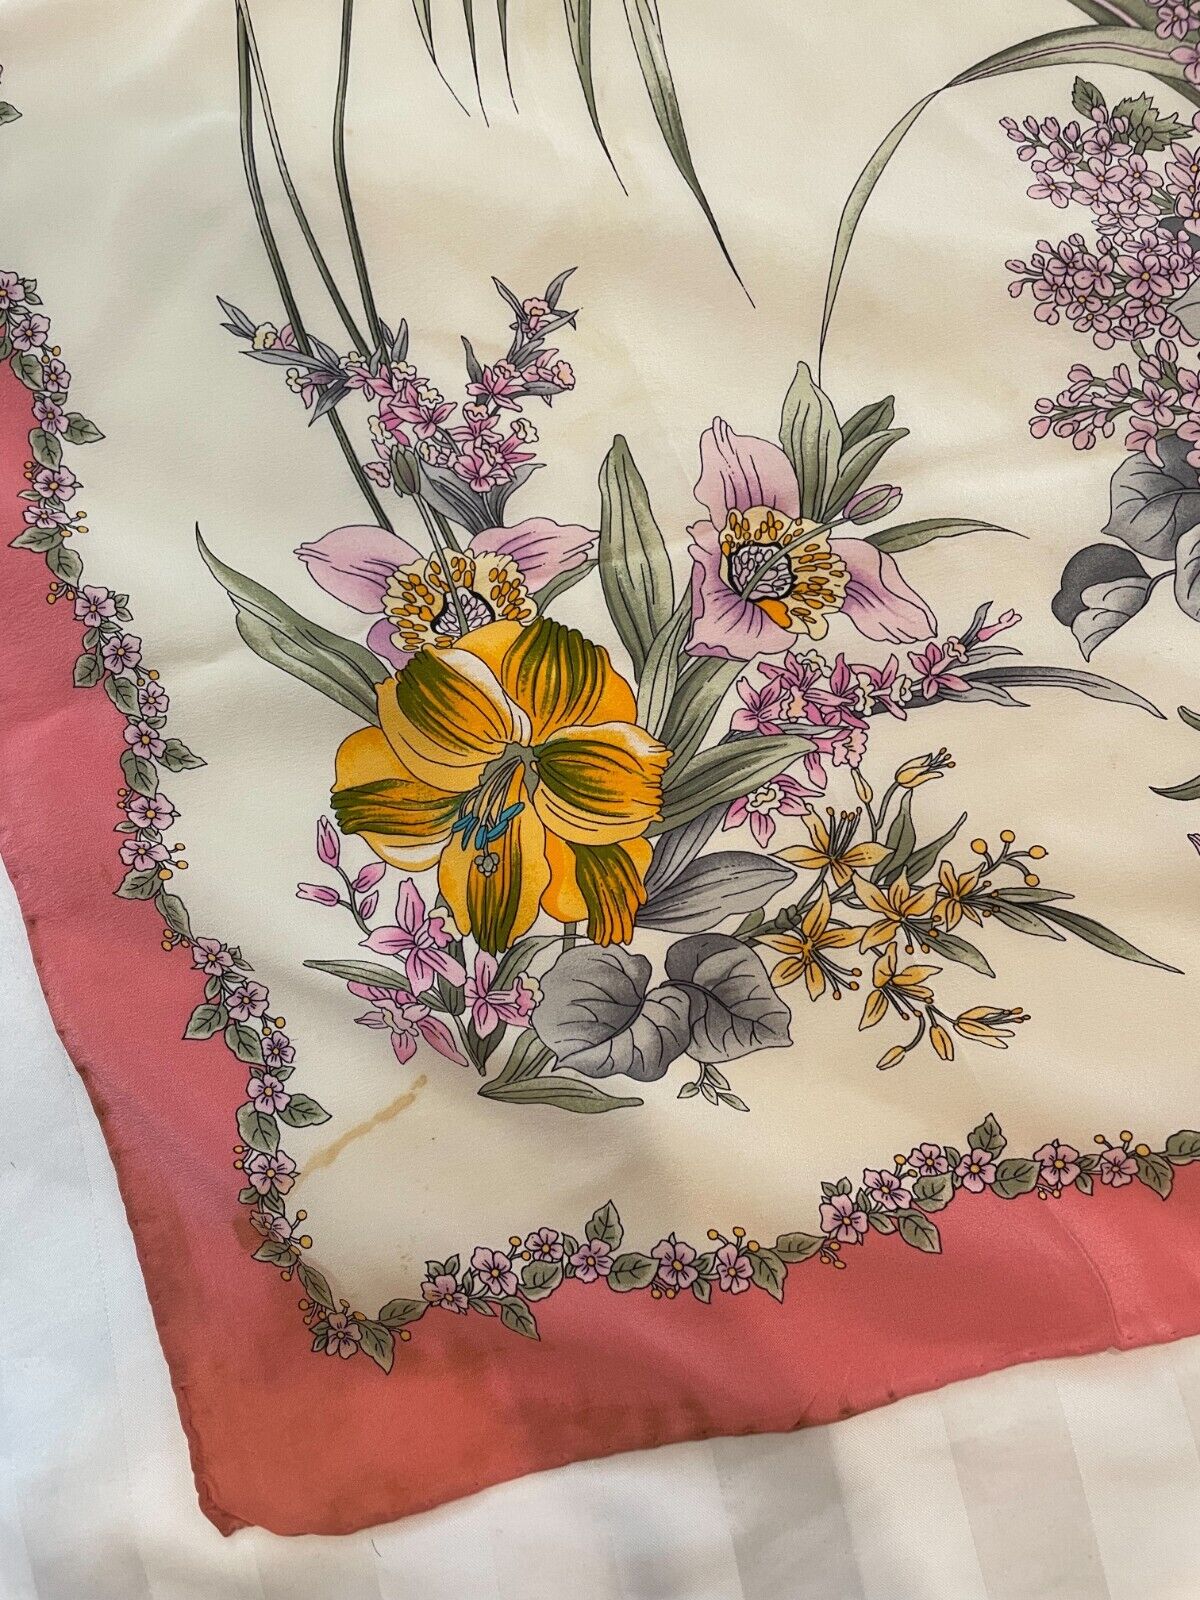 Gucci Silk Scarf Floral Pink Print Made in ITALY - image 4